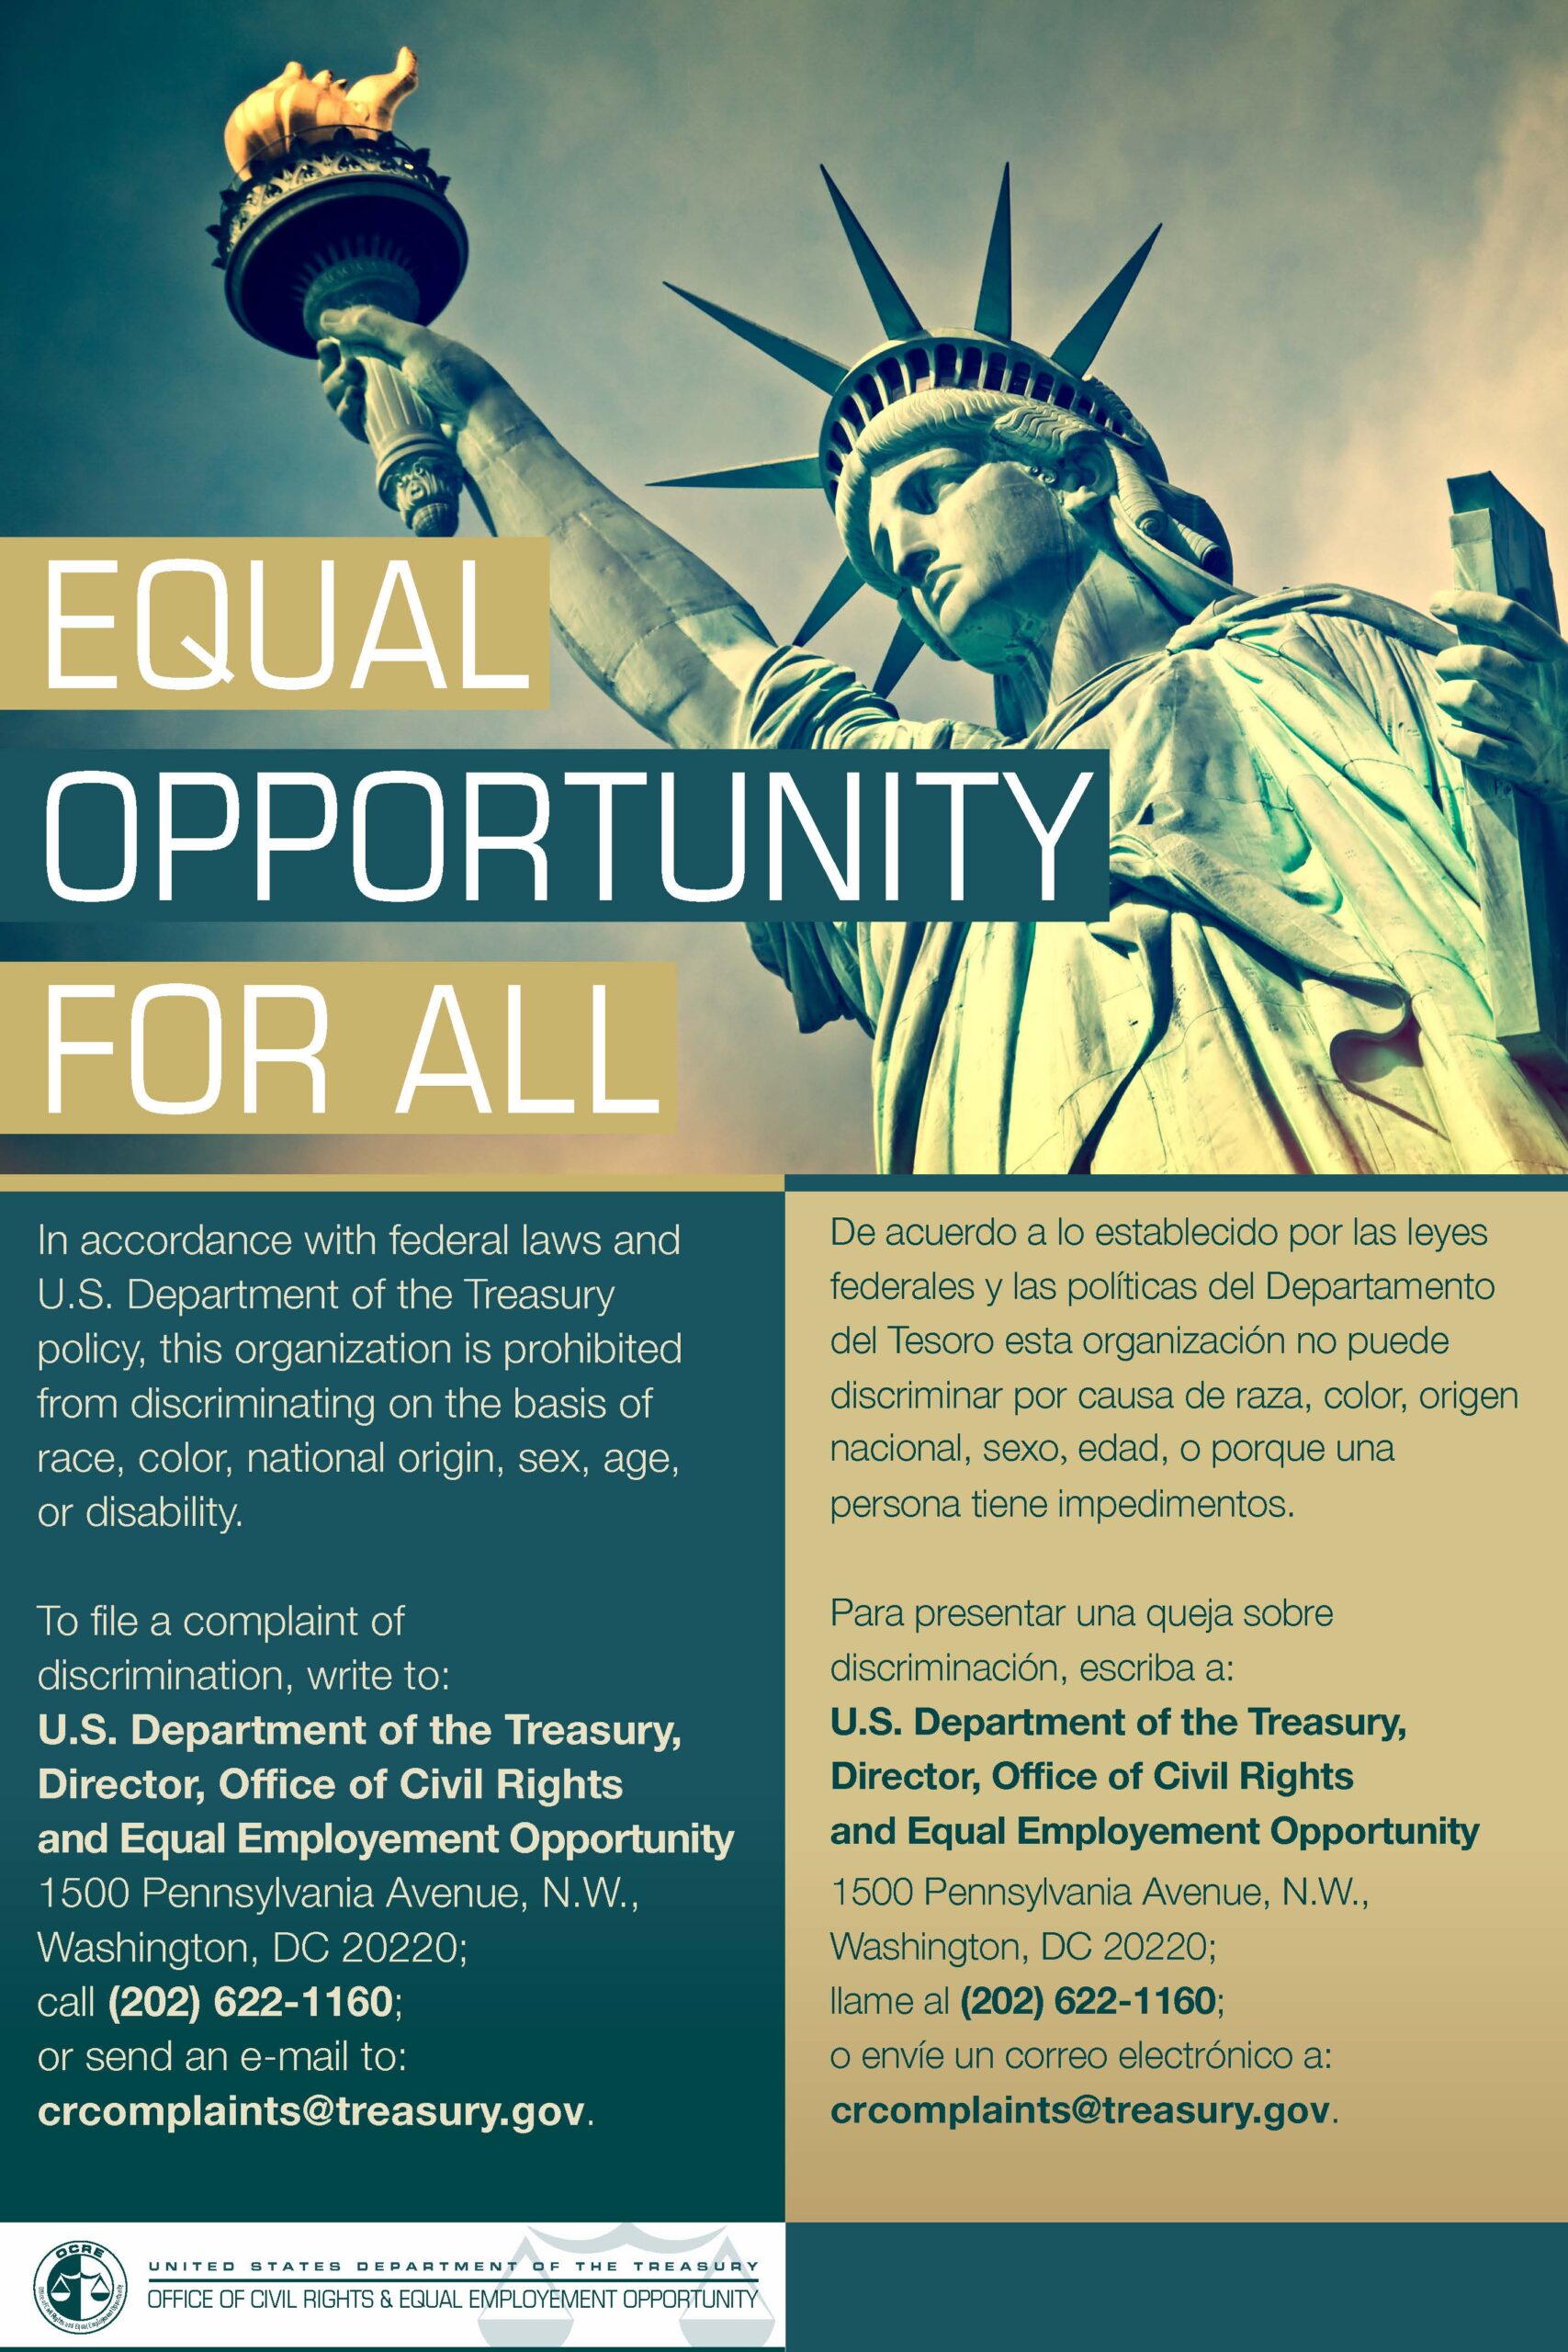 In accordance with Federal Law and U.S. Department of the Treasury policy, this institution is prohibited from discriminating based on race, color, national origin, sex, age, or disability. Submit a complaint of discrimination, by mail to U.S. Department of the Treasury, Office of Civil Rights and Equal Employment Opportunity , 1500 Pennsylvania Ave. N.W., Washington, D.C. 20220, (202) 622-1160 (phone), (202) 622-0367 (fax), or email crcomplaints@treasury.gov (email).